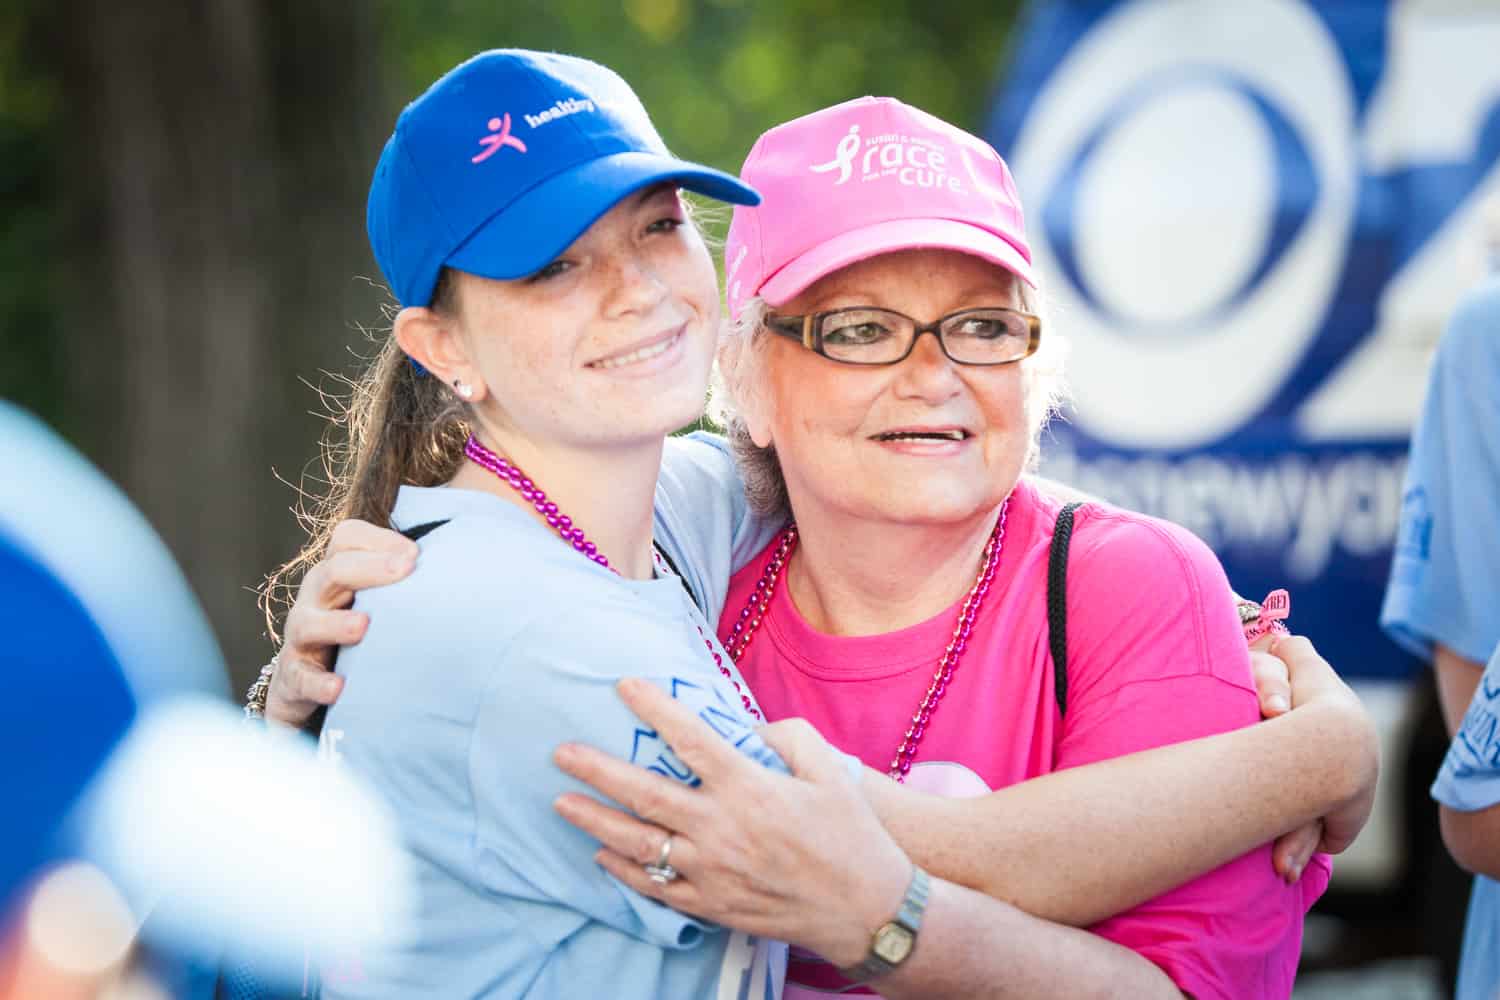 NYC Race for the Cure photos of two women hugging